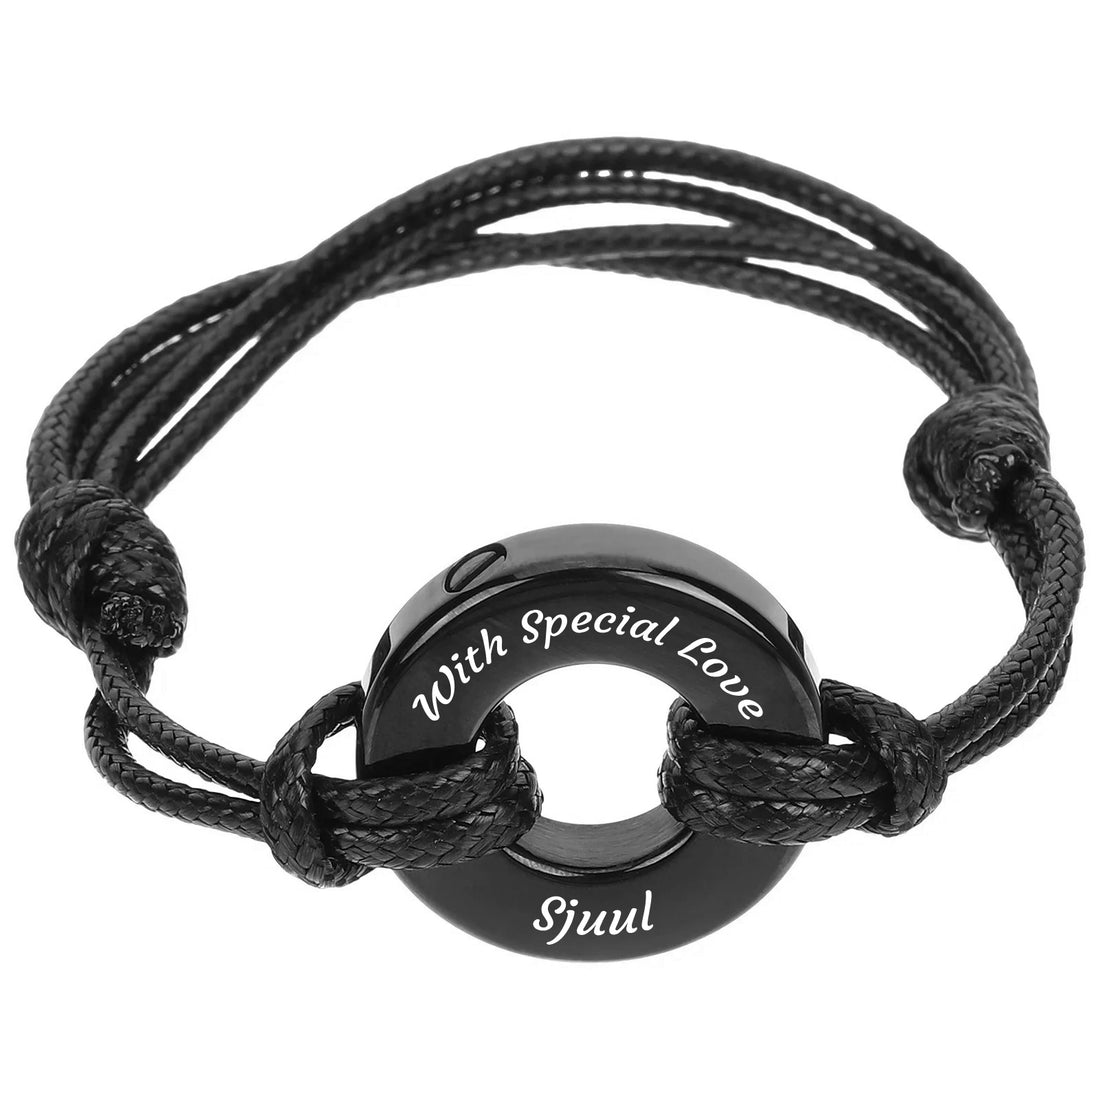 Urn Bracelet - Adjustable leather + Stainless Steel Ash Chamber with Engraving